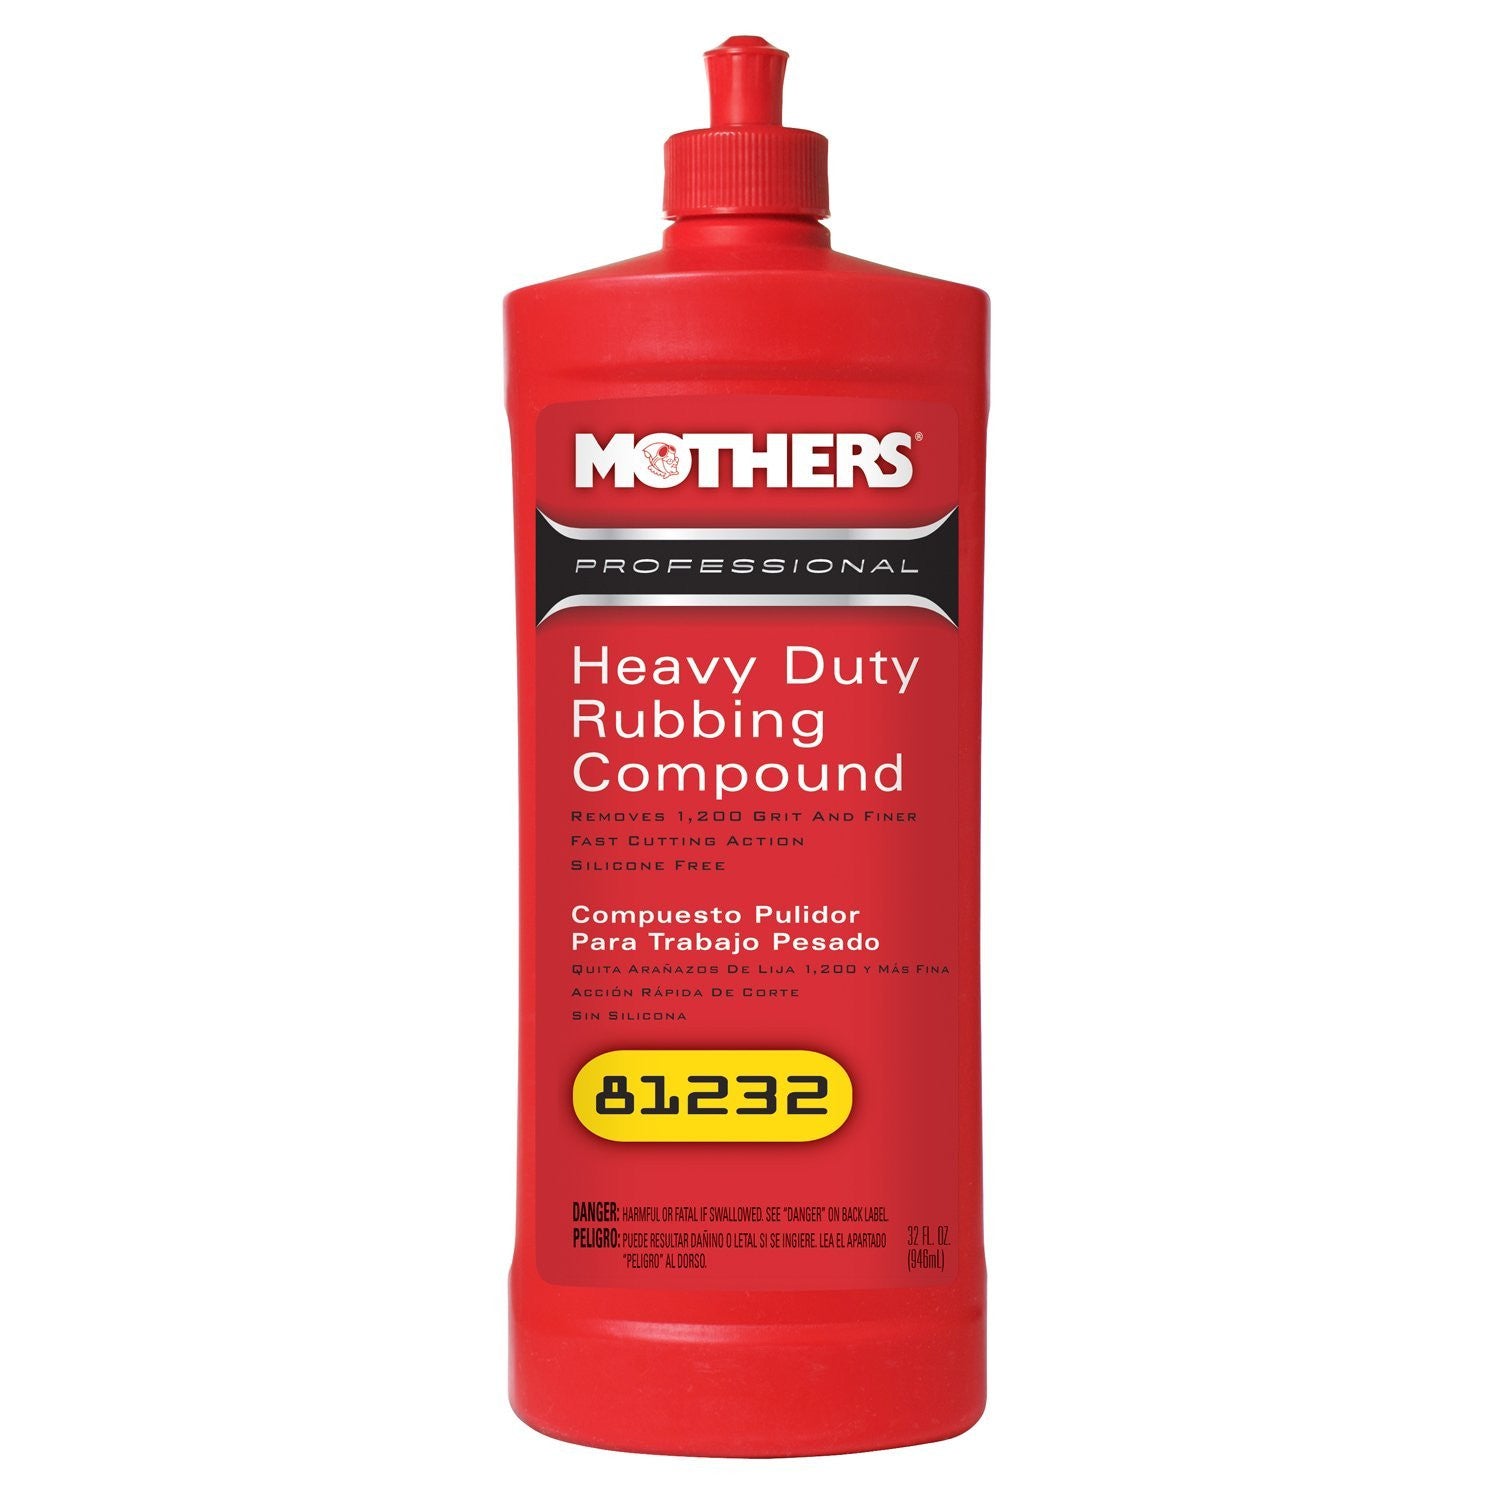 Mothers Professional Heavy Duty Rubbing Compound